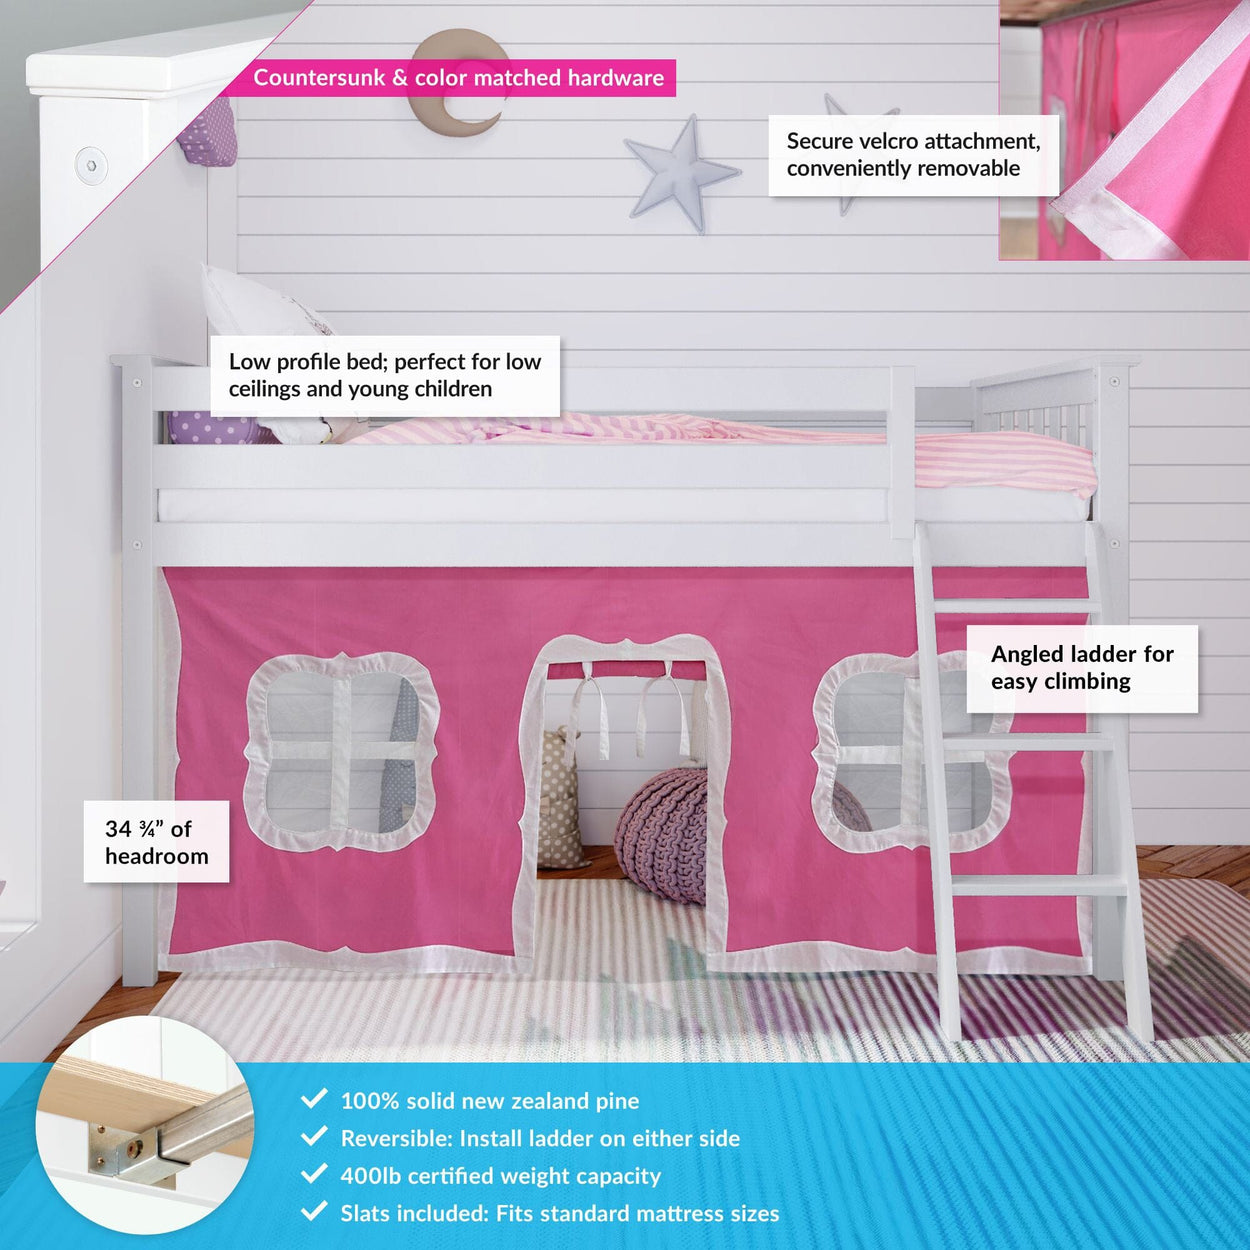 180212002078 : Loft Beds Twin-Size Low Loft With Curtain, White + Pink